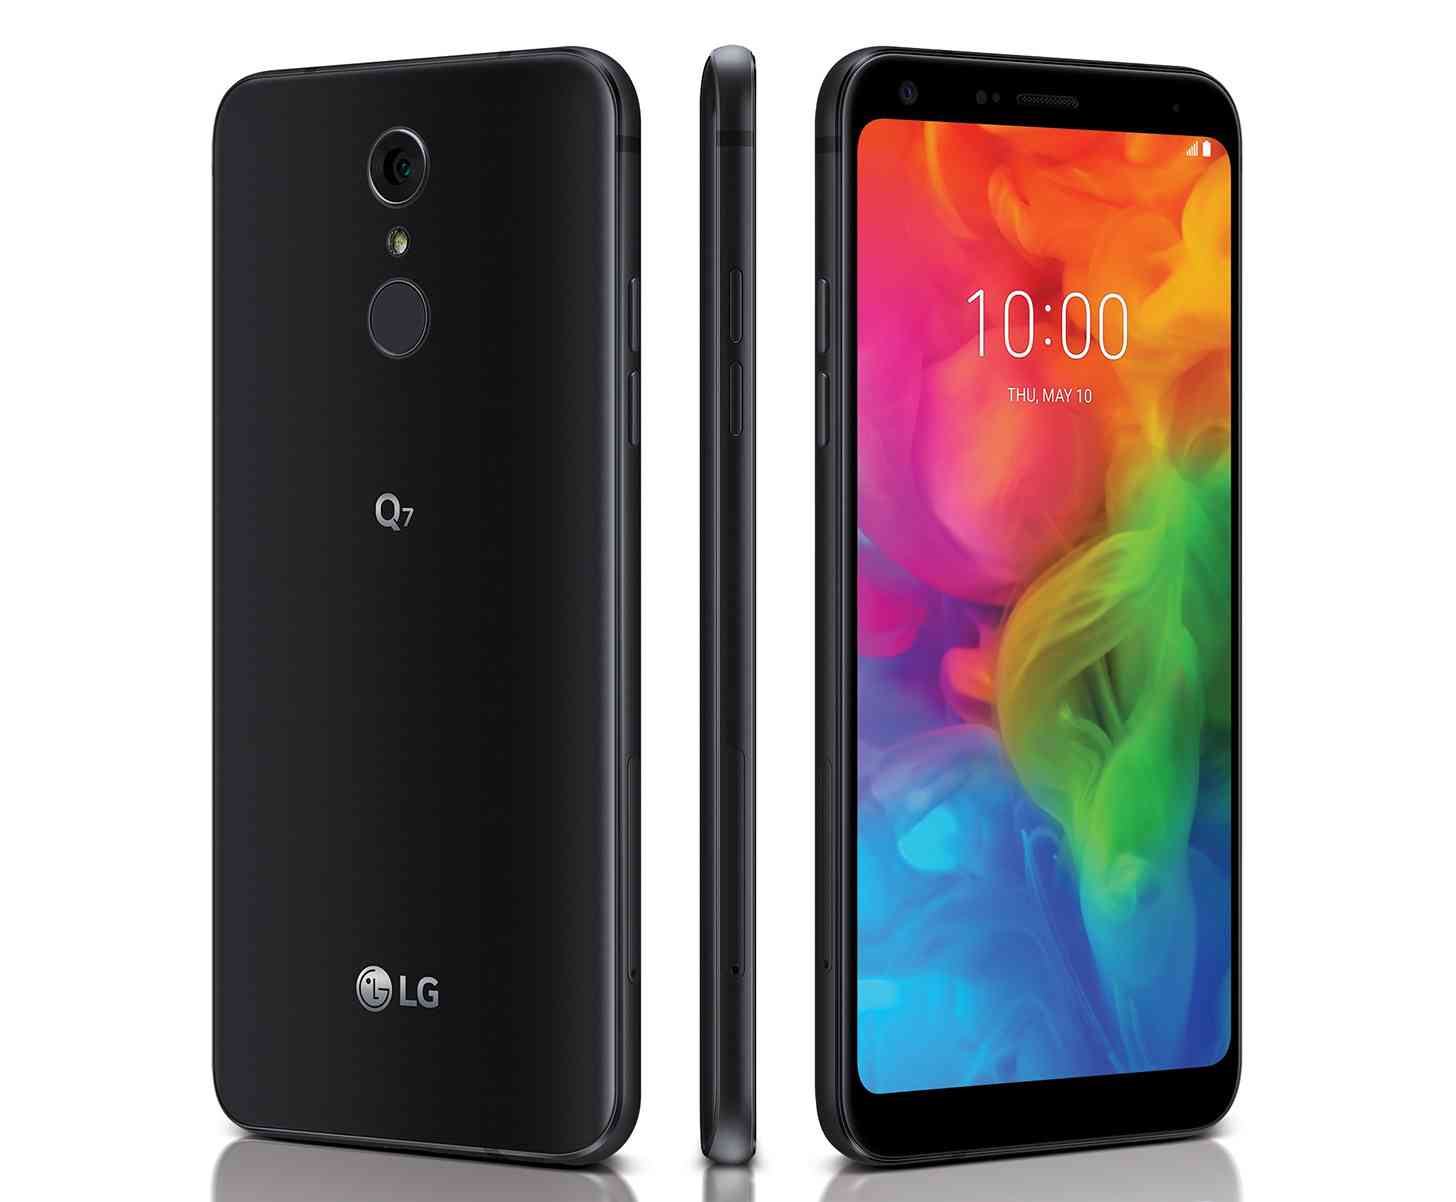 LG Q7 official front, side, rear